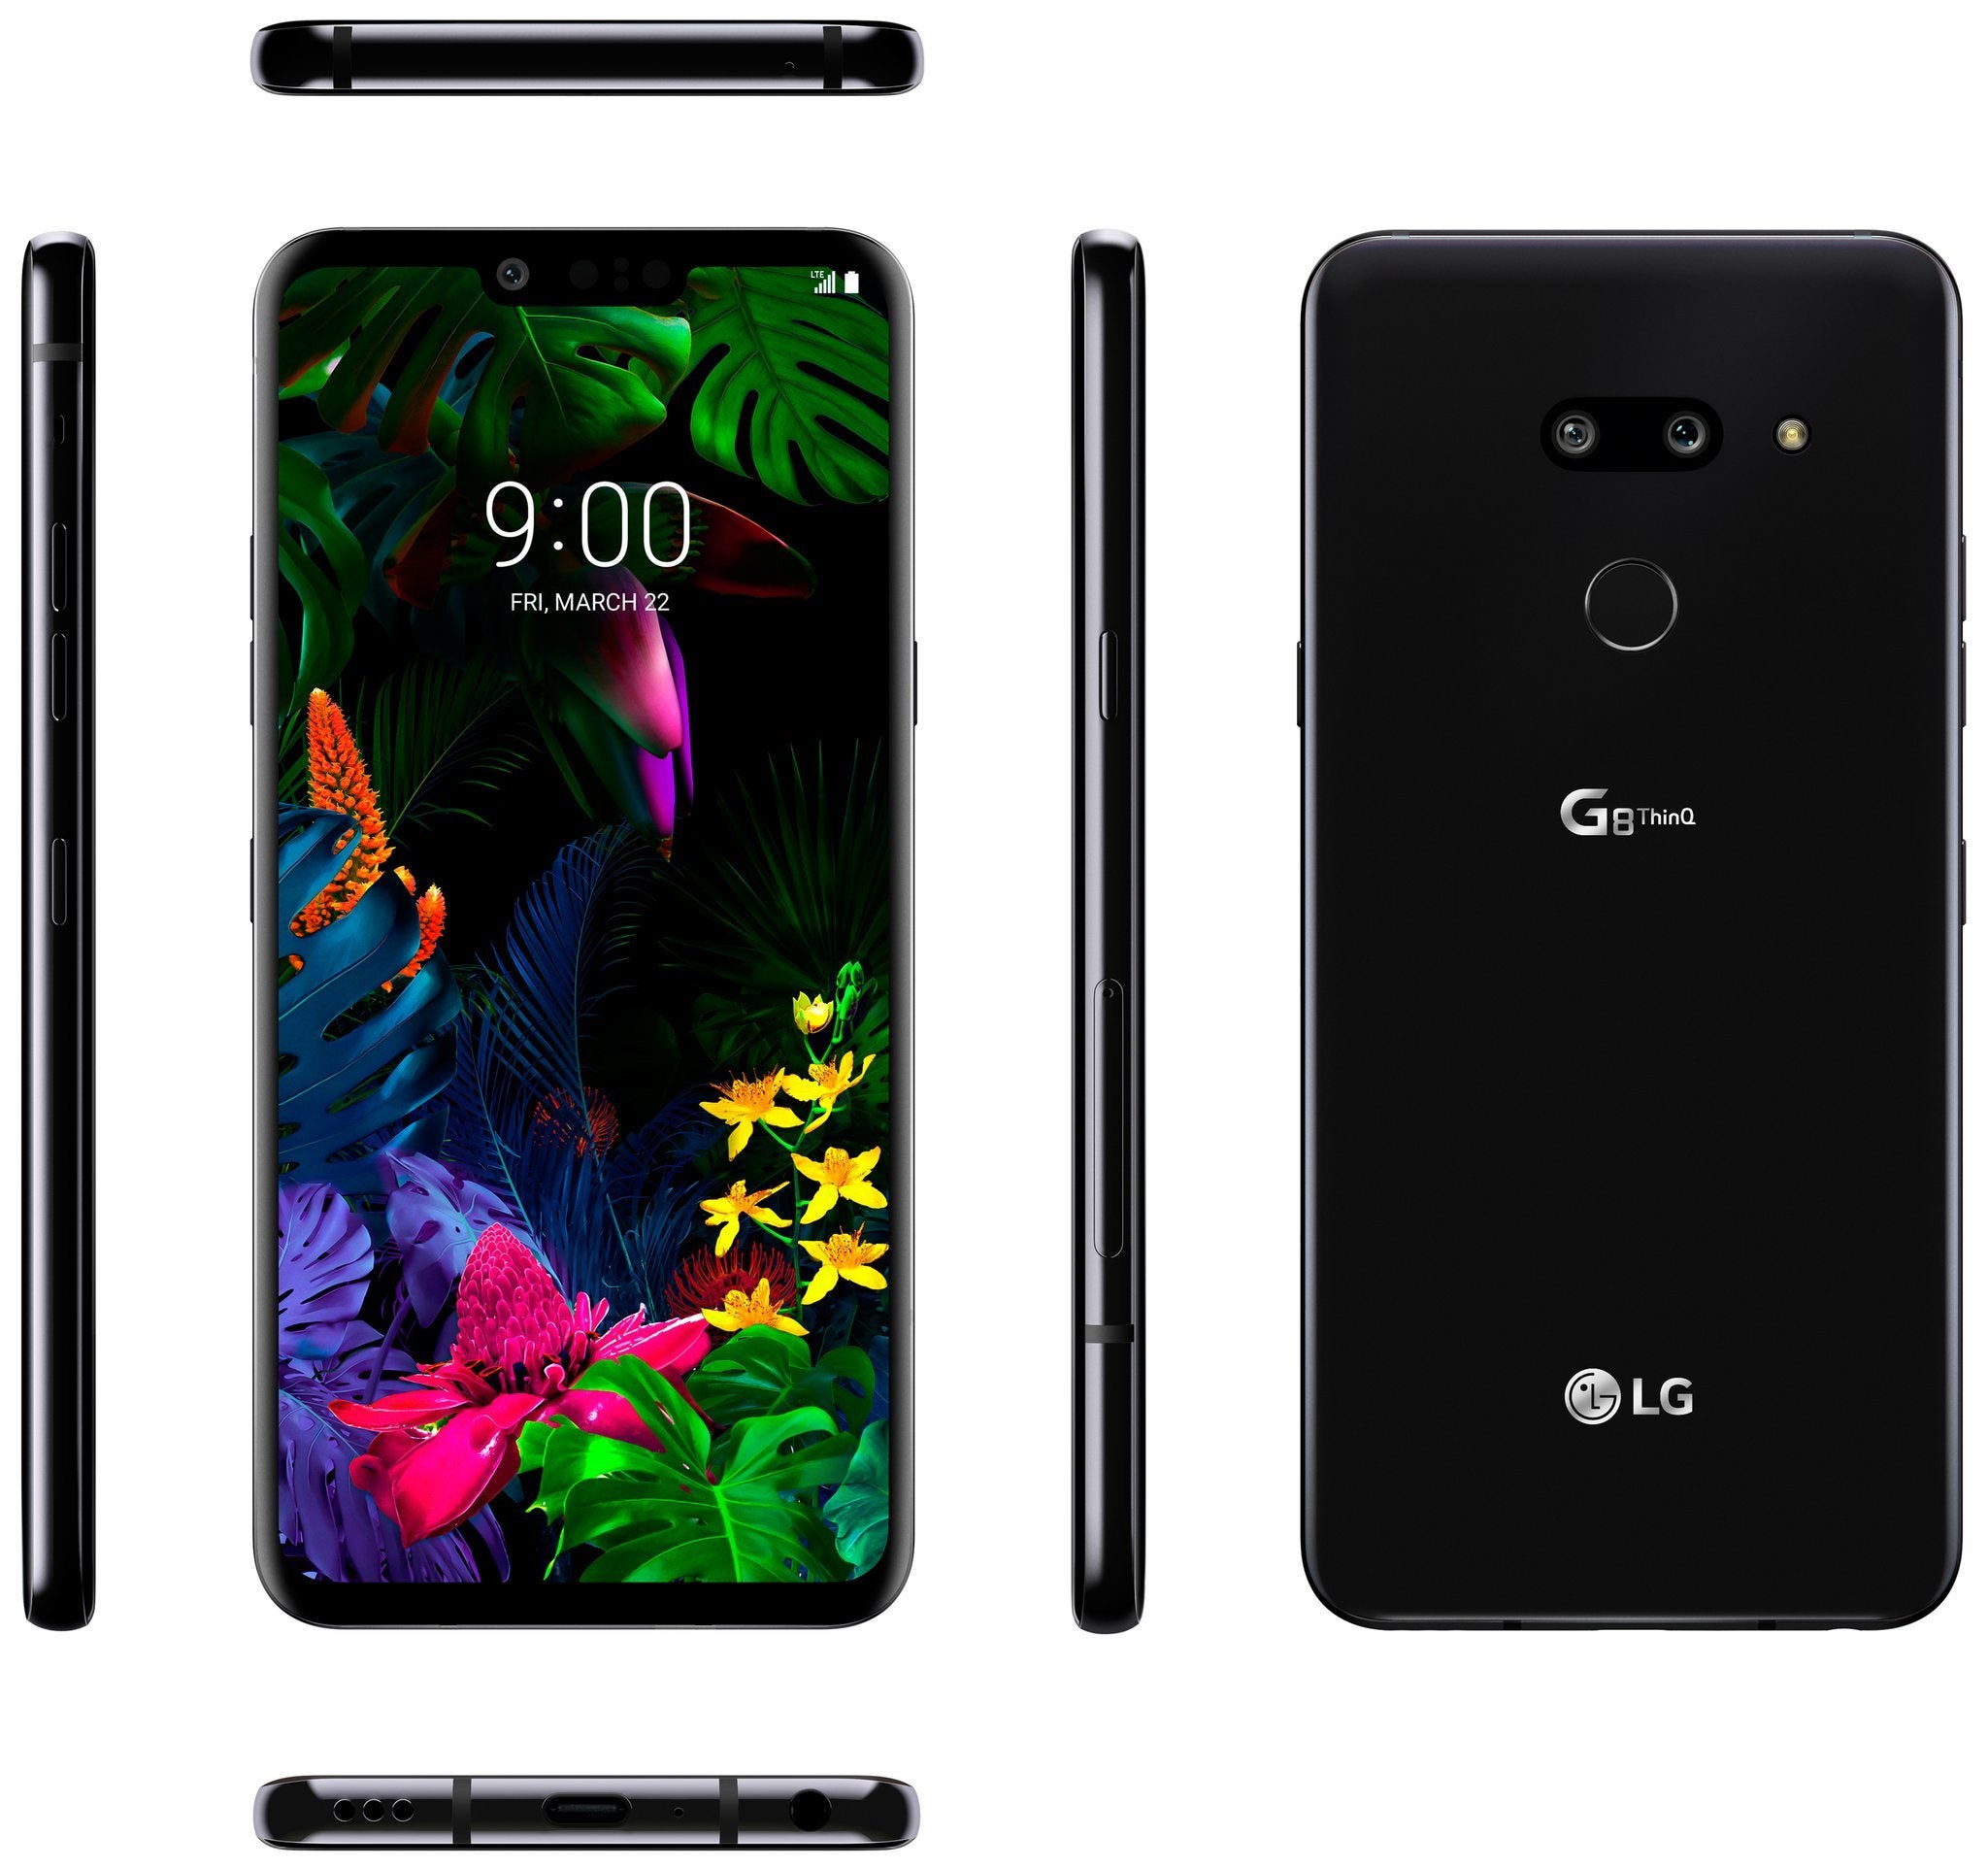 LG G8 rumors: design, specs, price, and release date